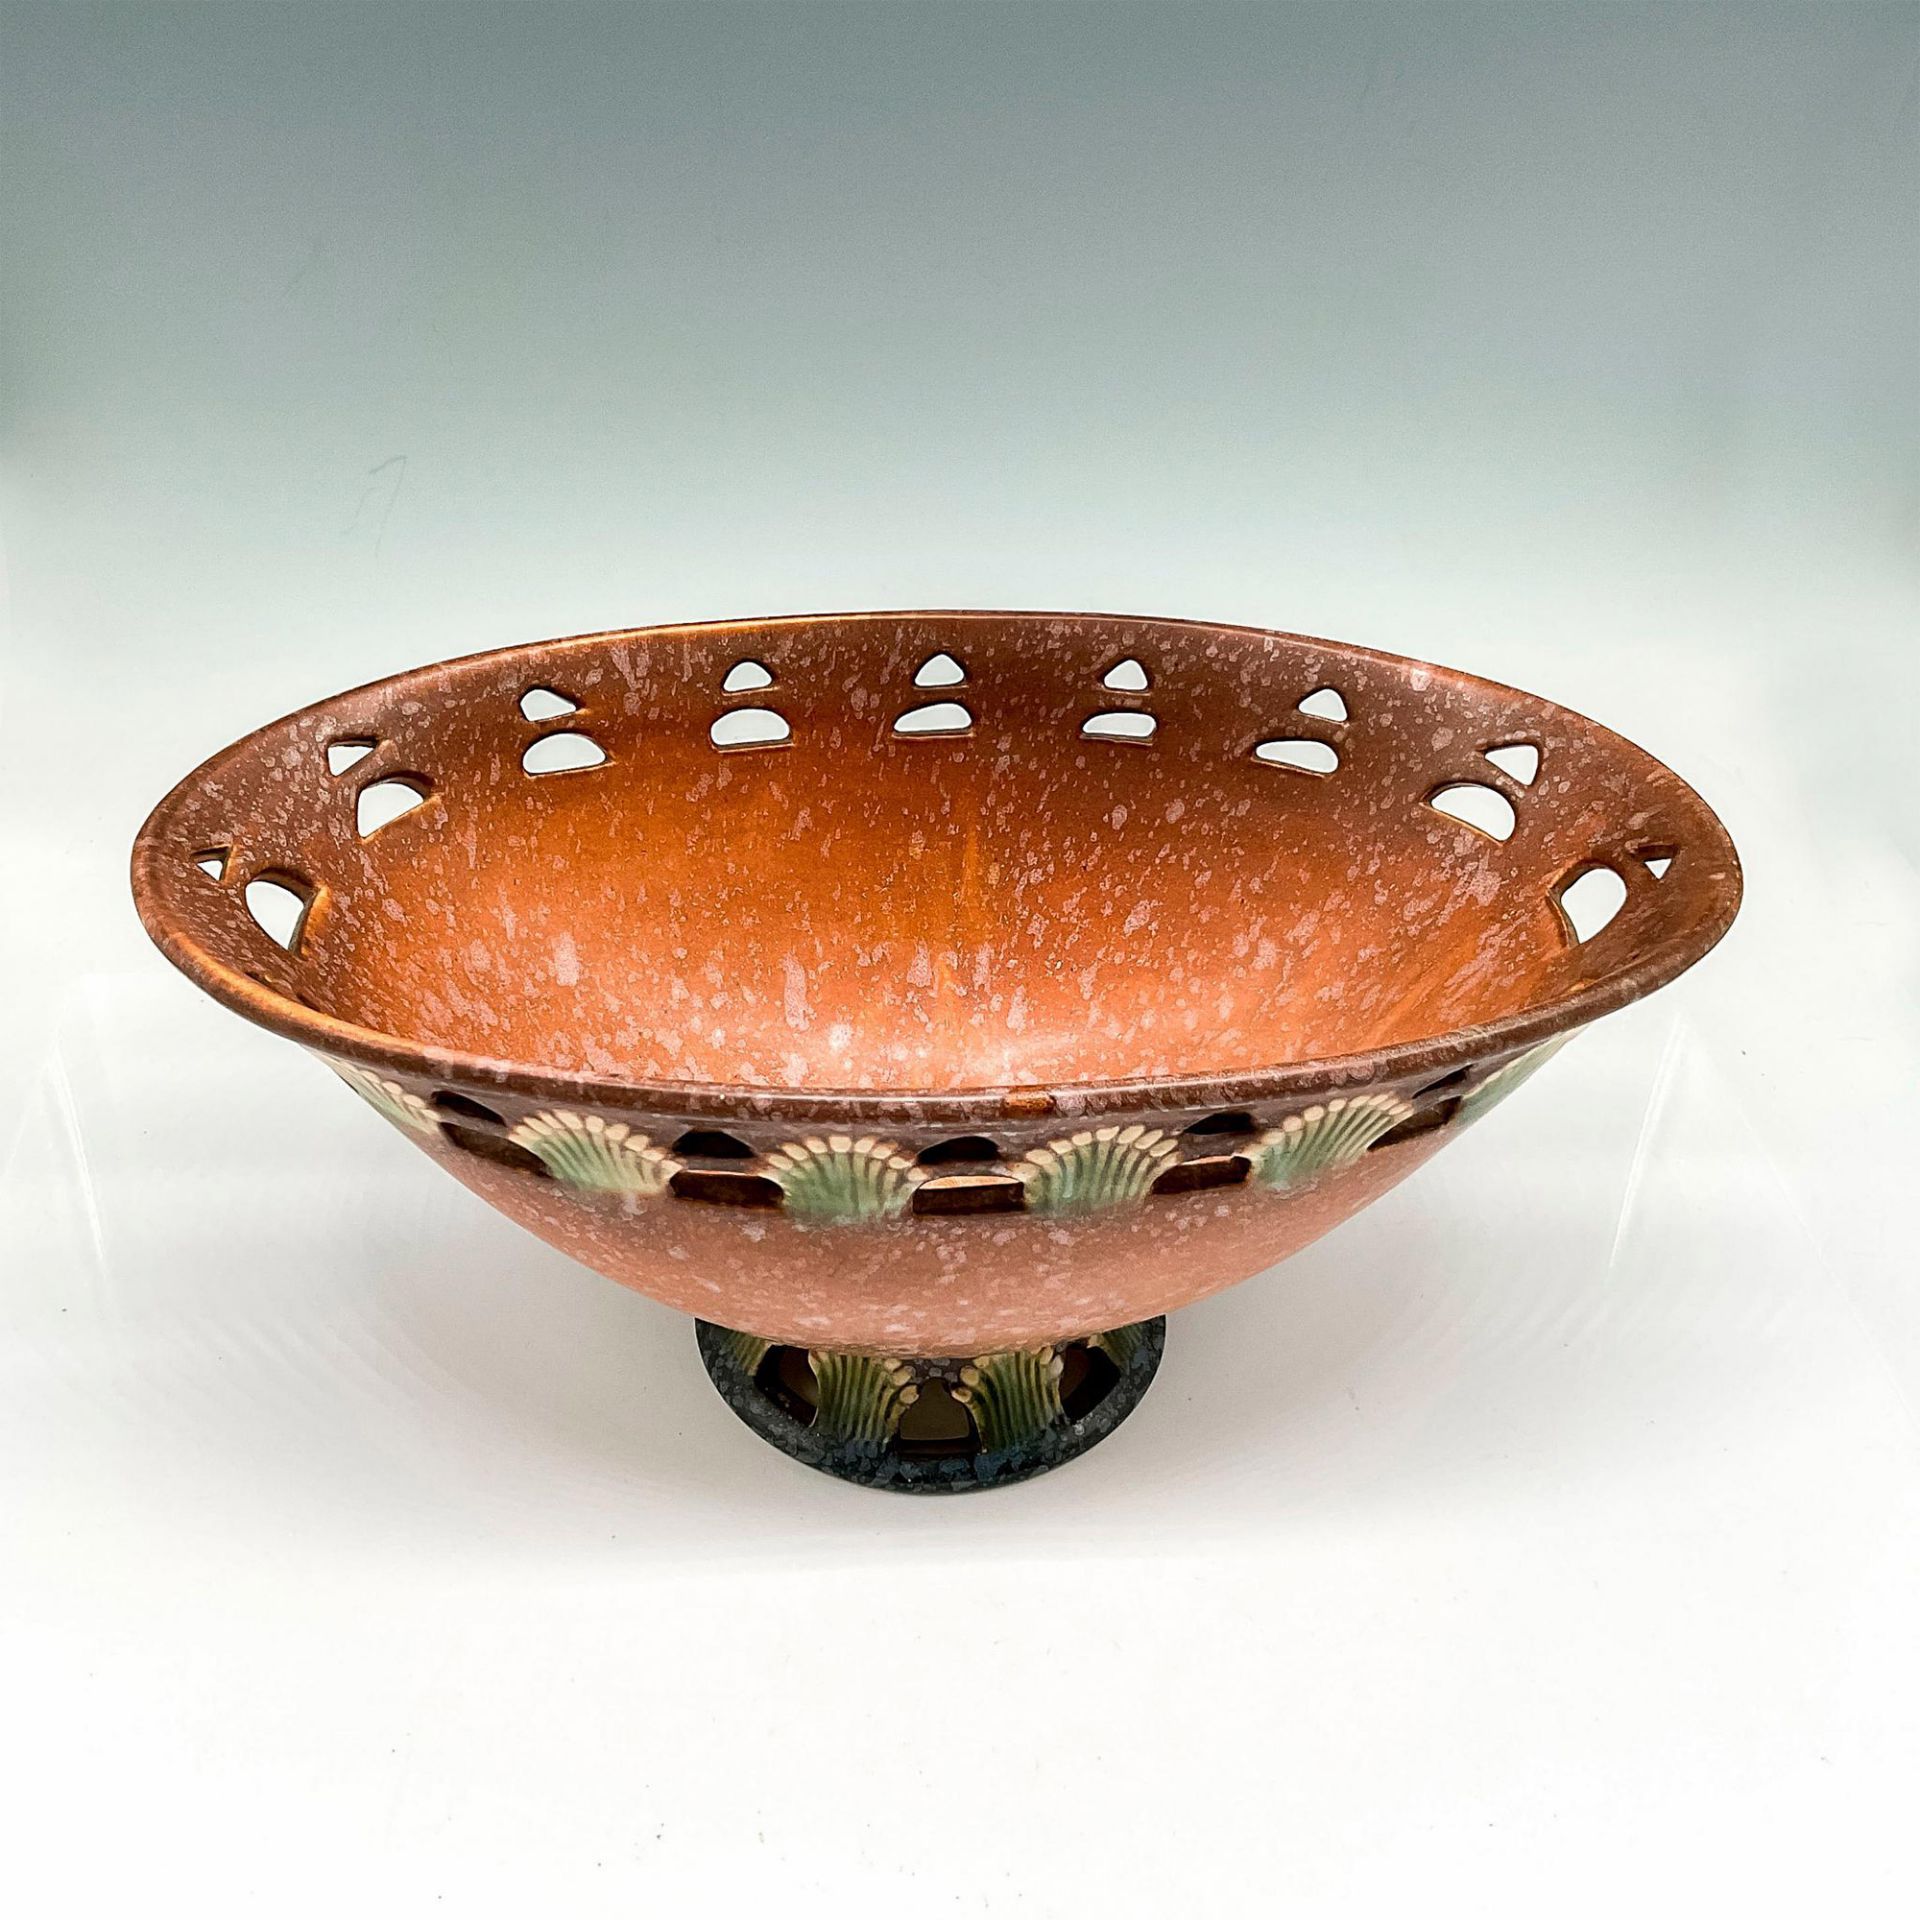 Roseville Pottery Console Bowl, Ferella Brown - Image 2 of 3